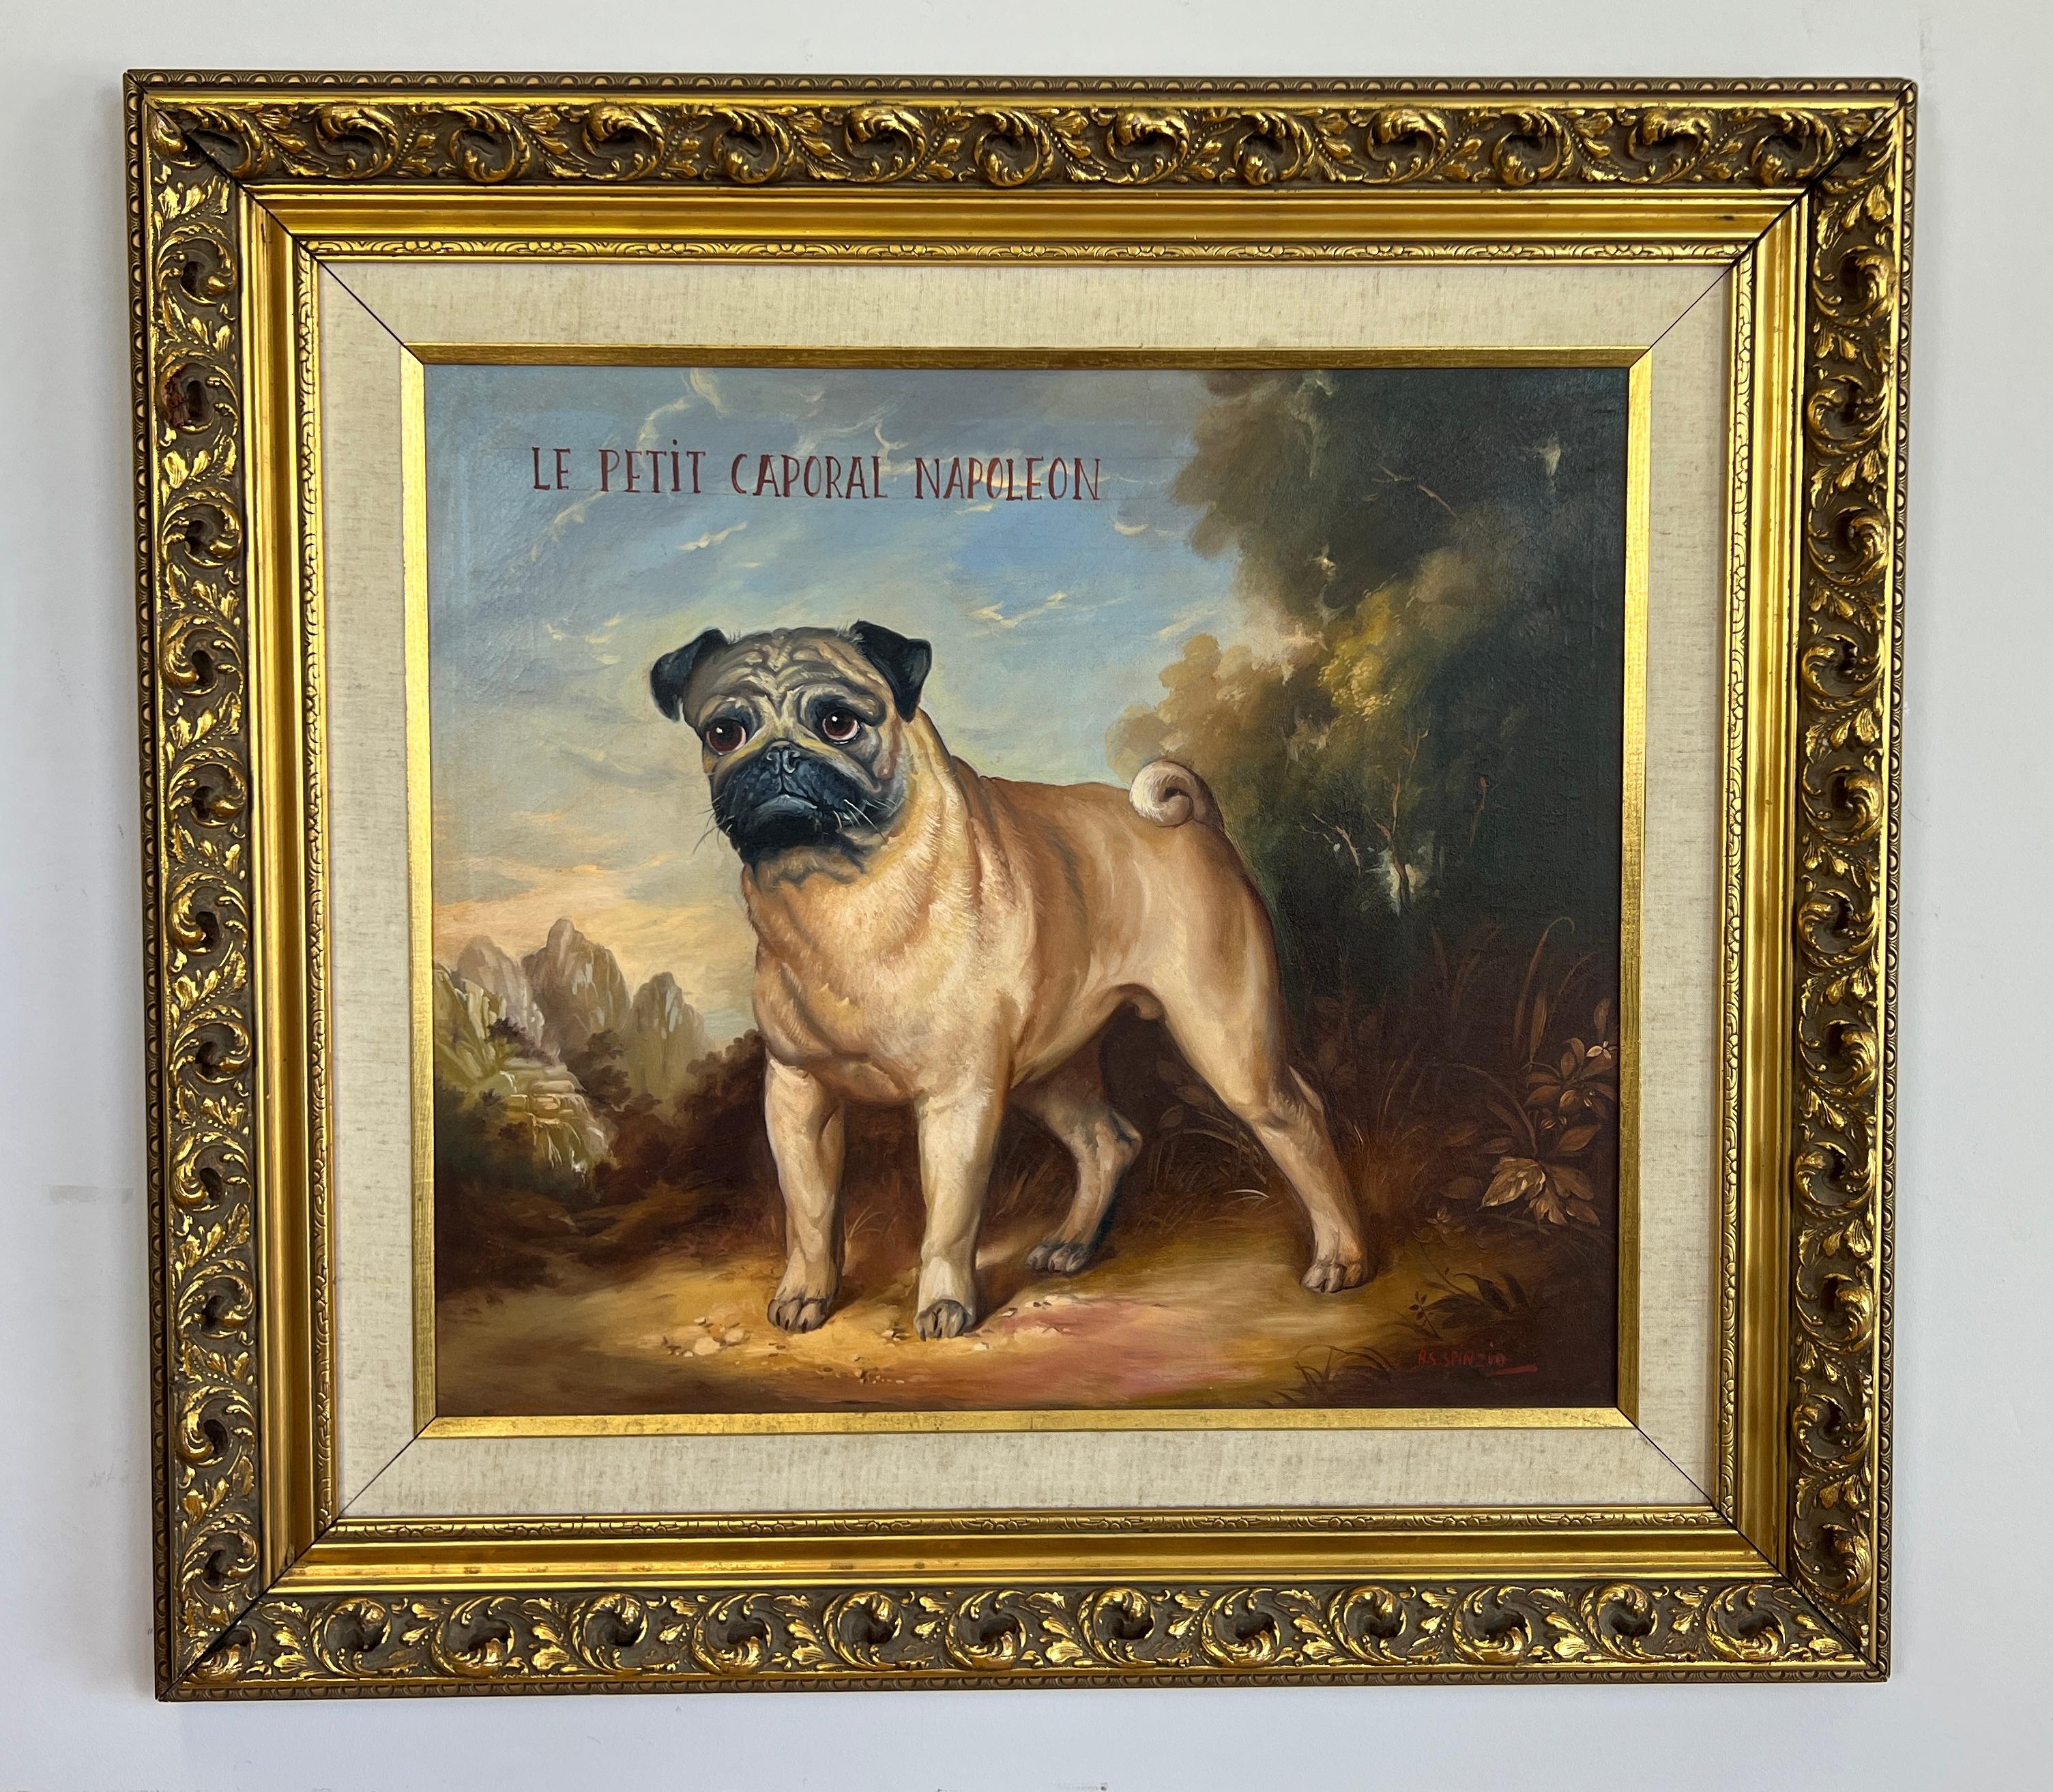 Offered here is a very large work of art of a pug dog, “Le Petit Corporal Napoleon